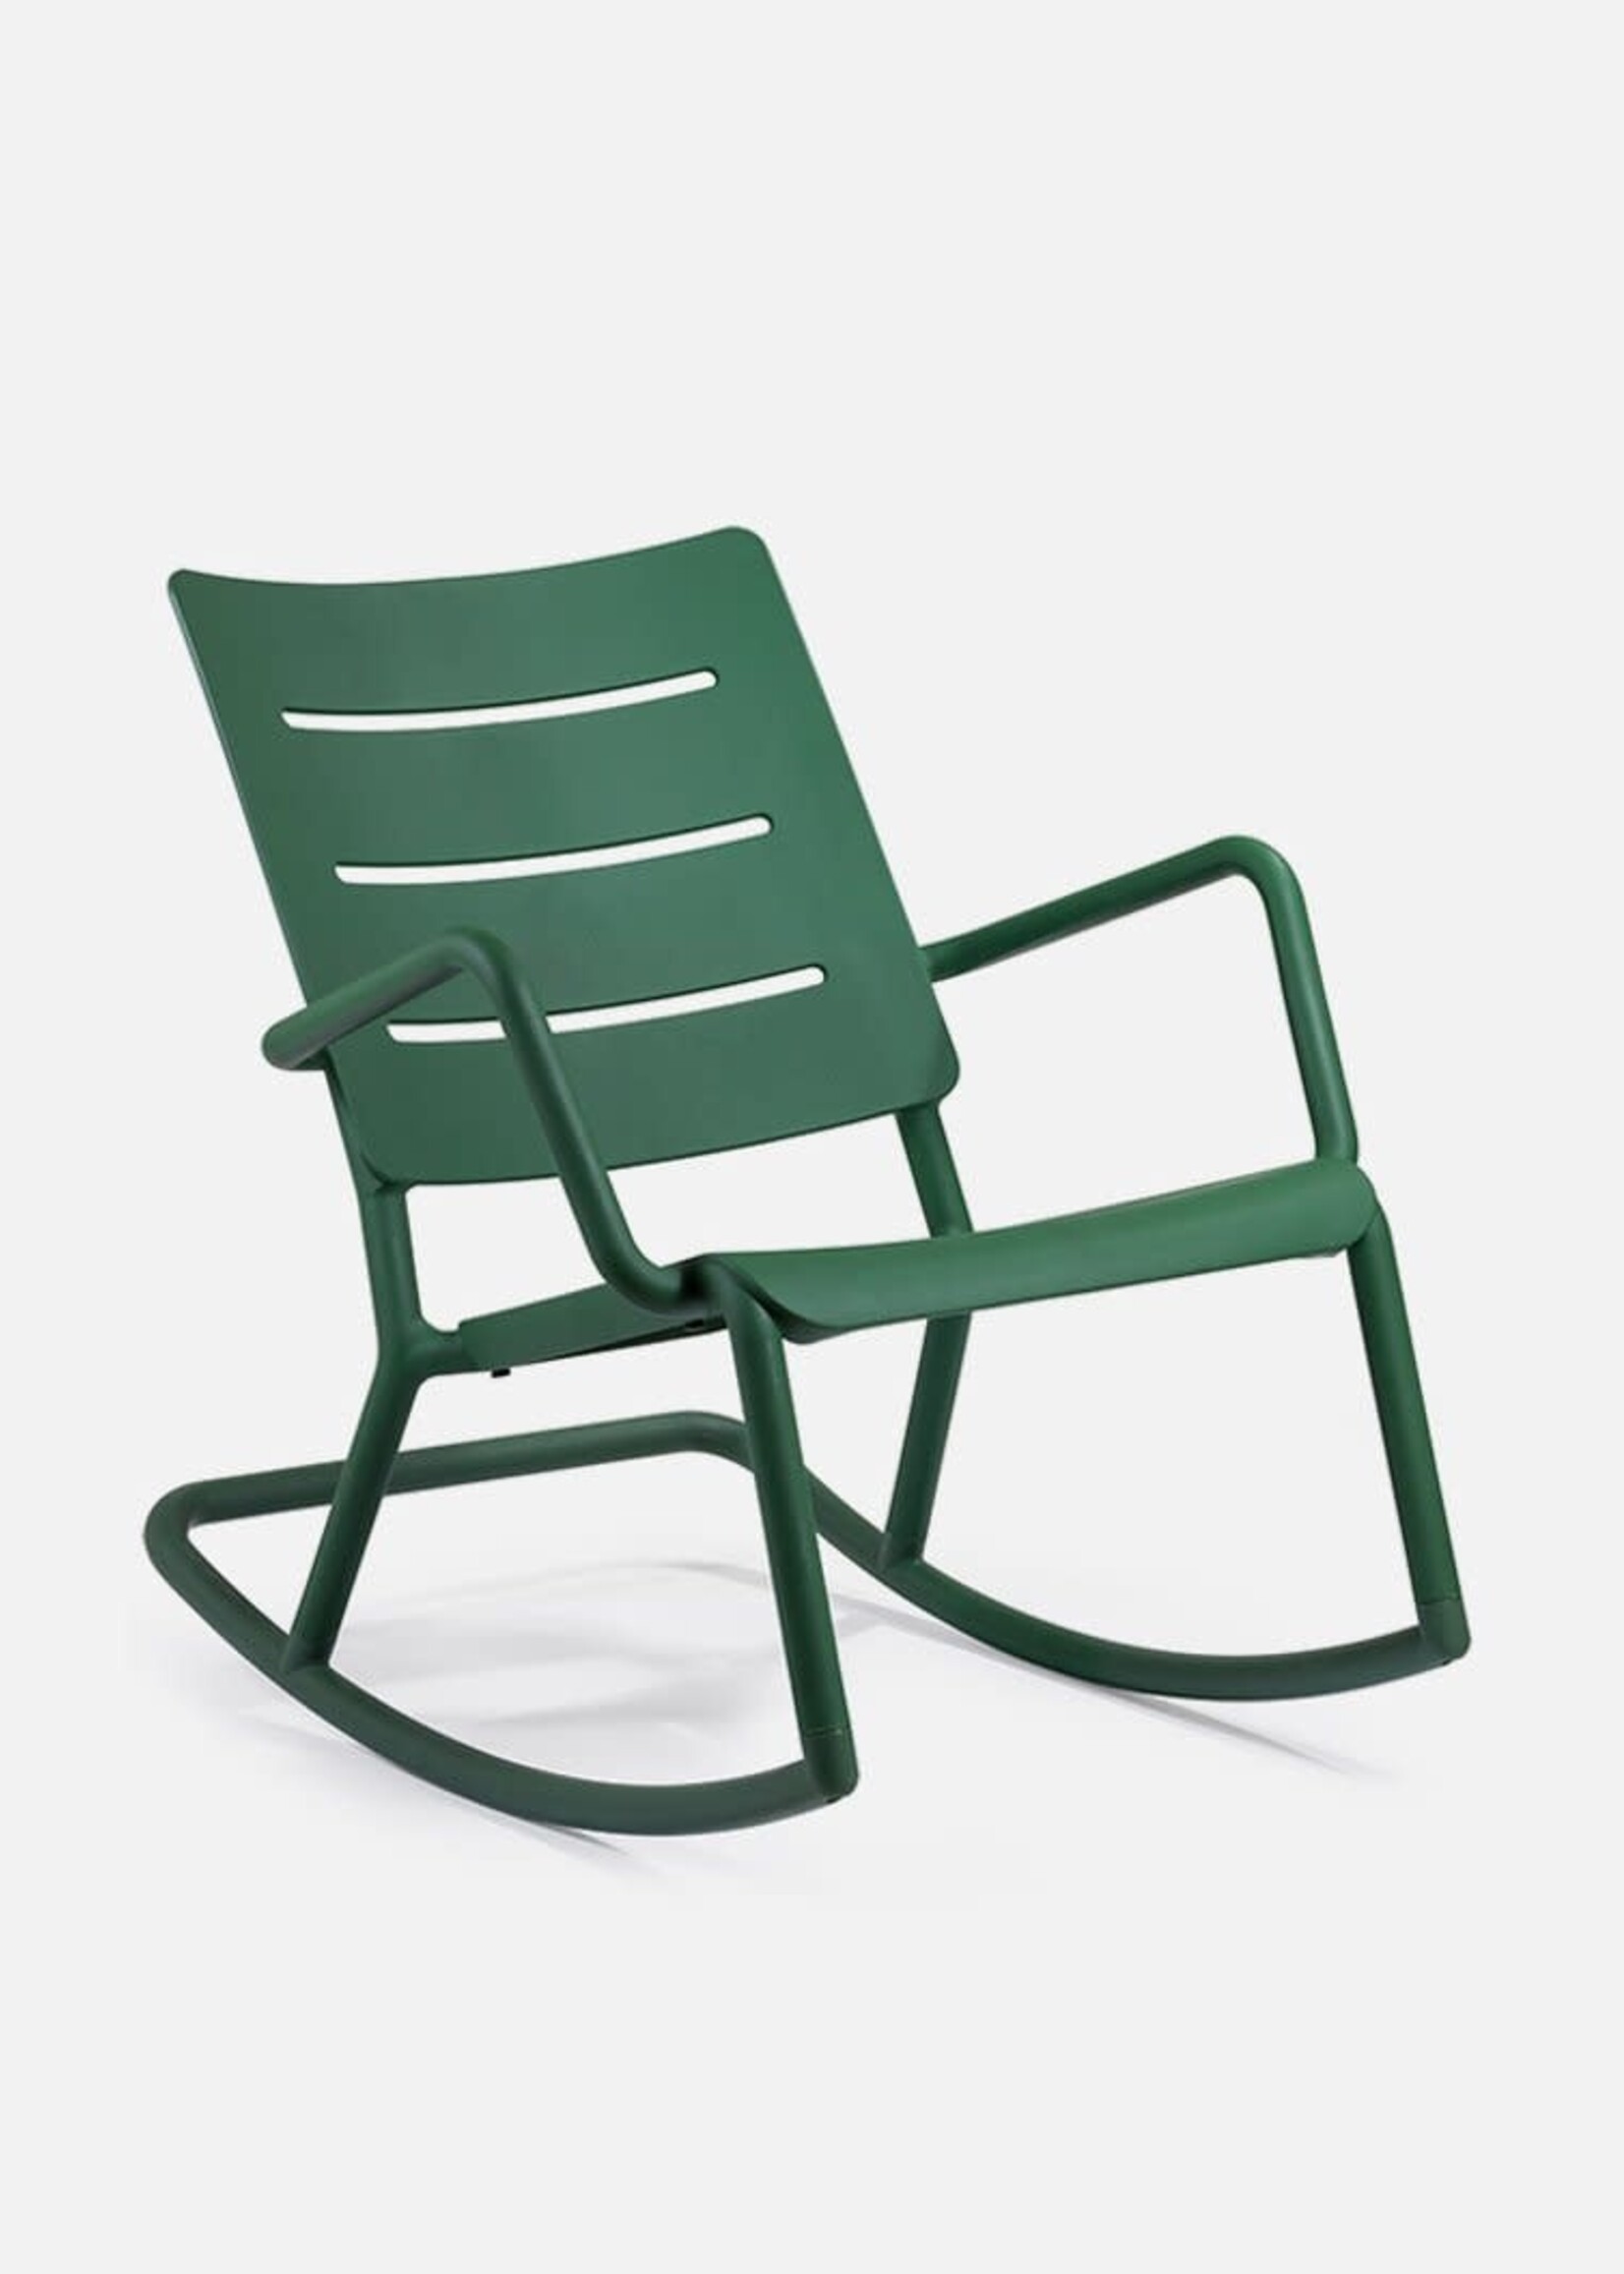 TOOU Outo Rocking Chair - Dark Green